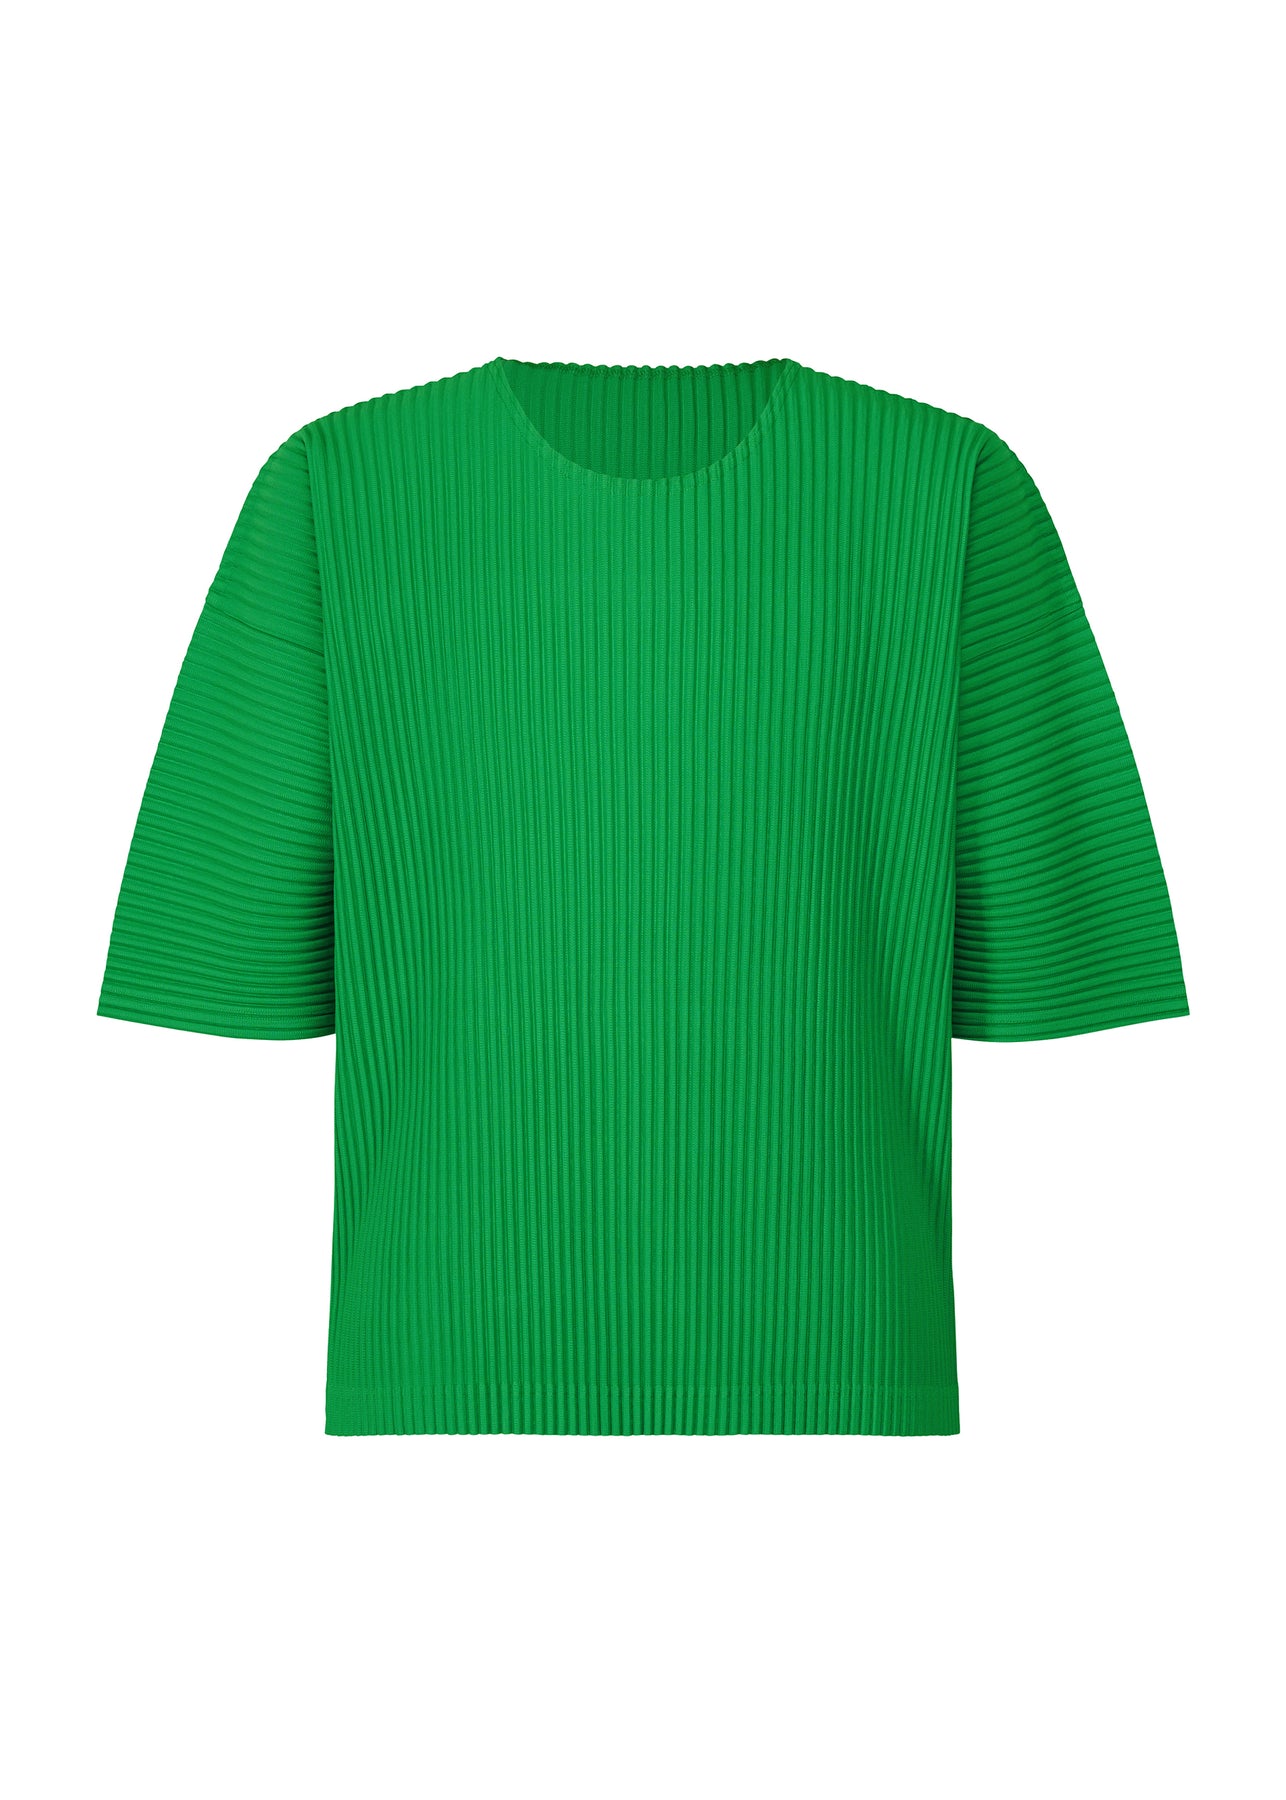 MC JULY T-SHIRT | The official ISSEY MIYAKE ONLINE STORE | ISSEY